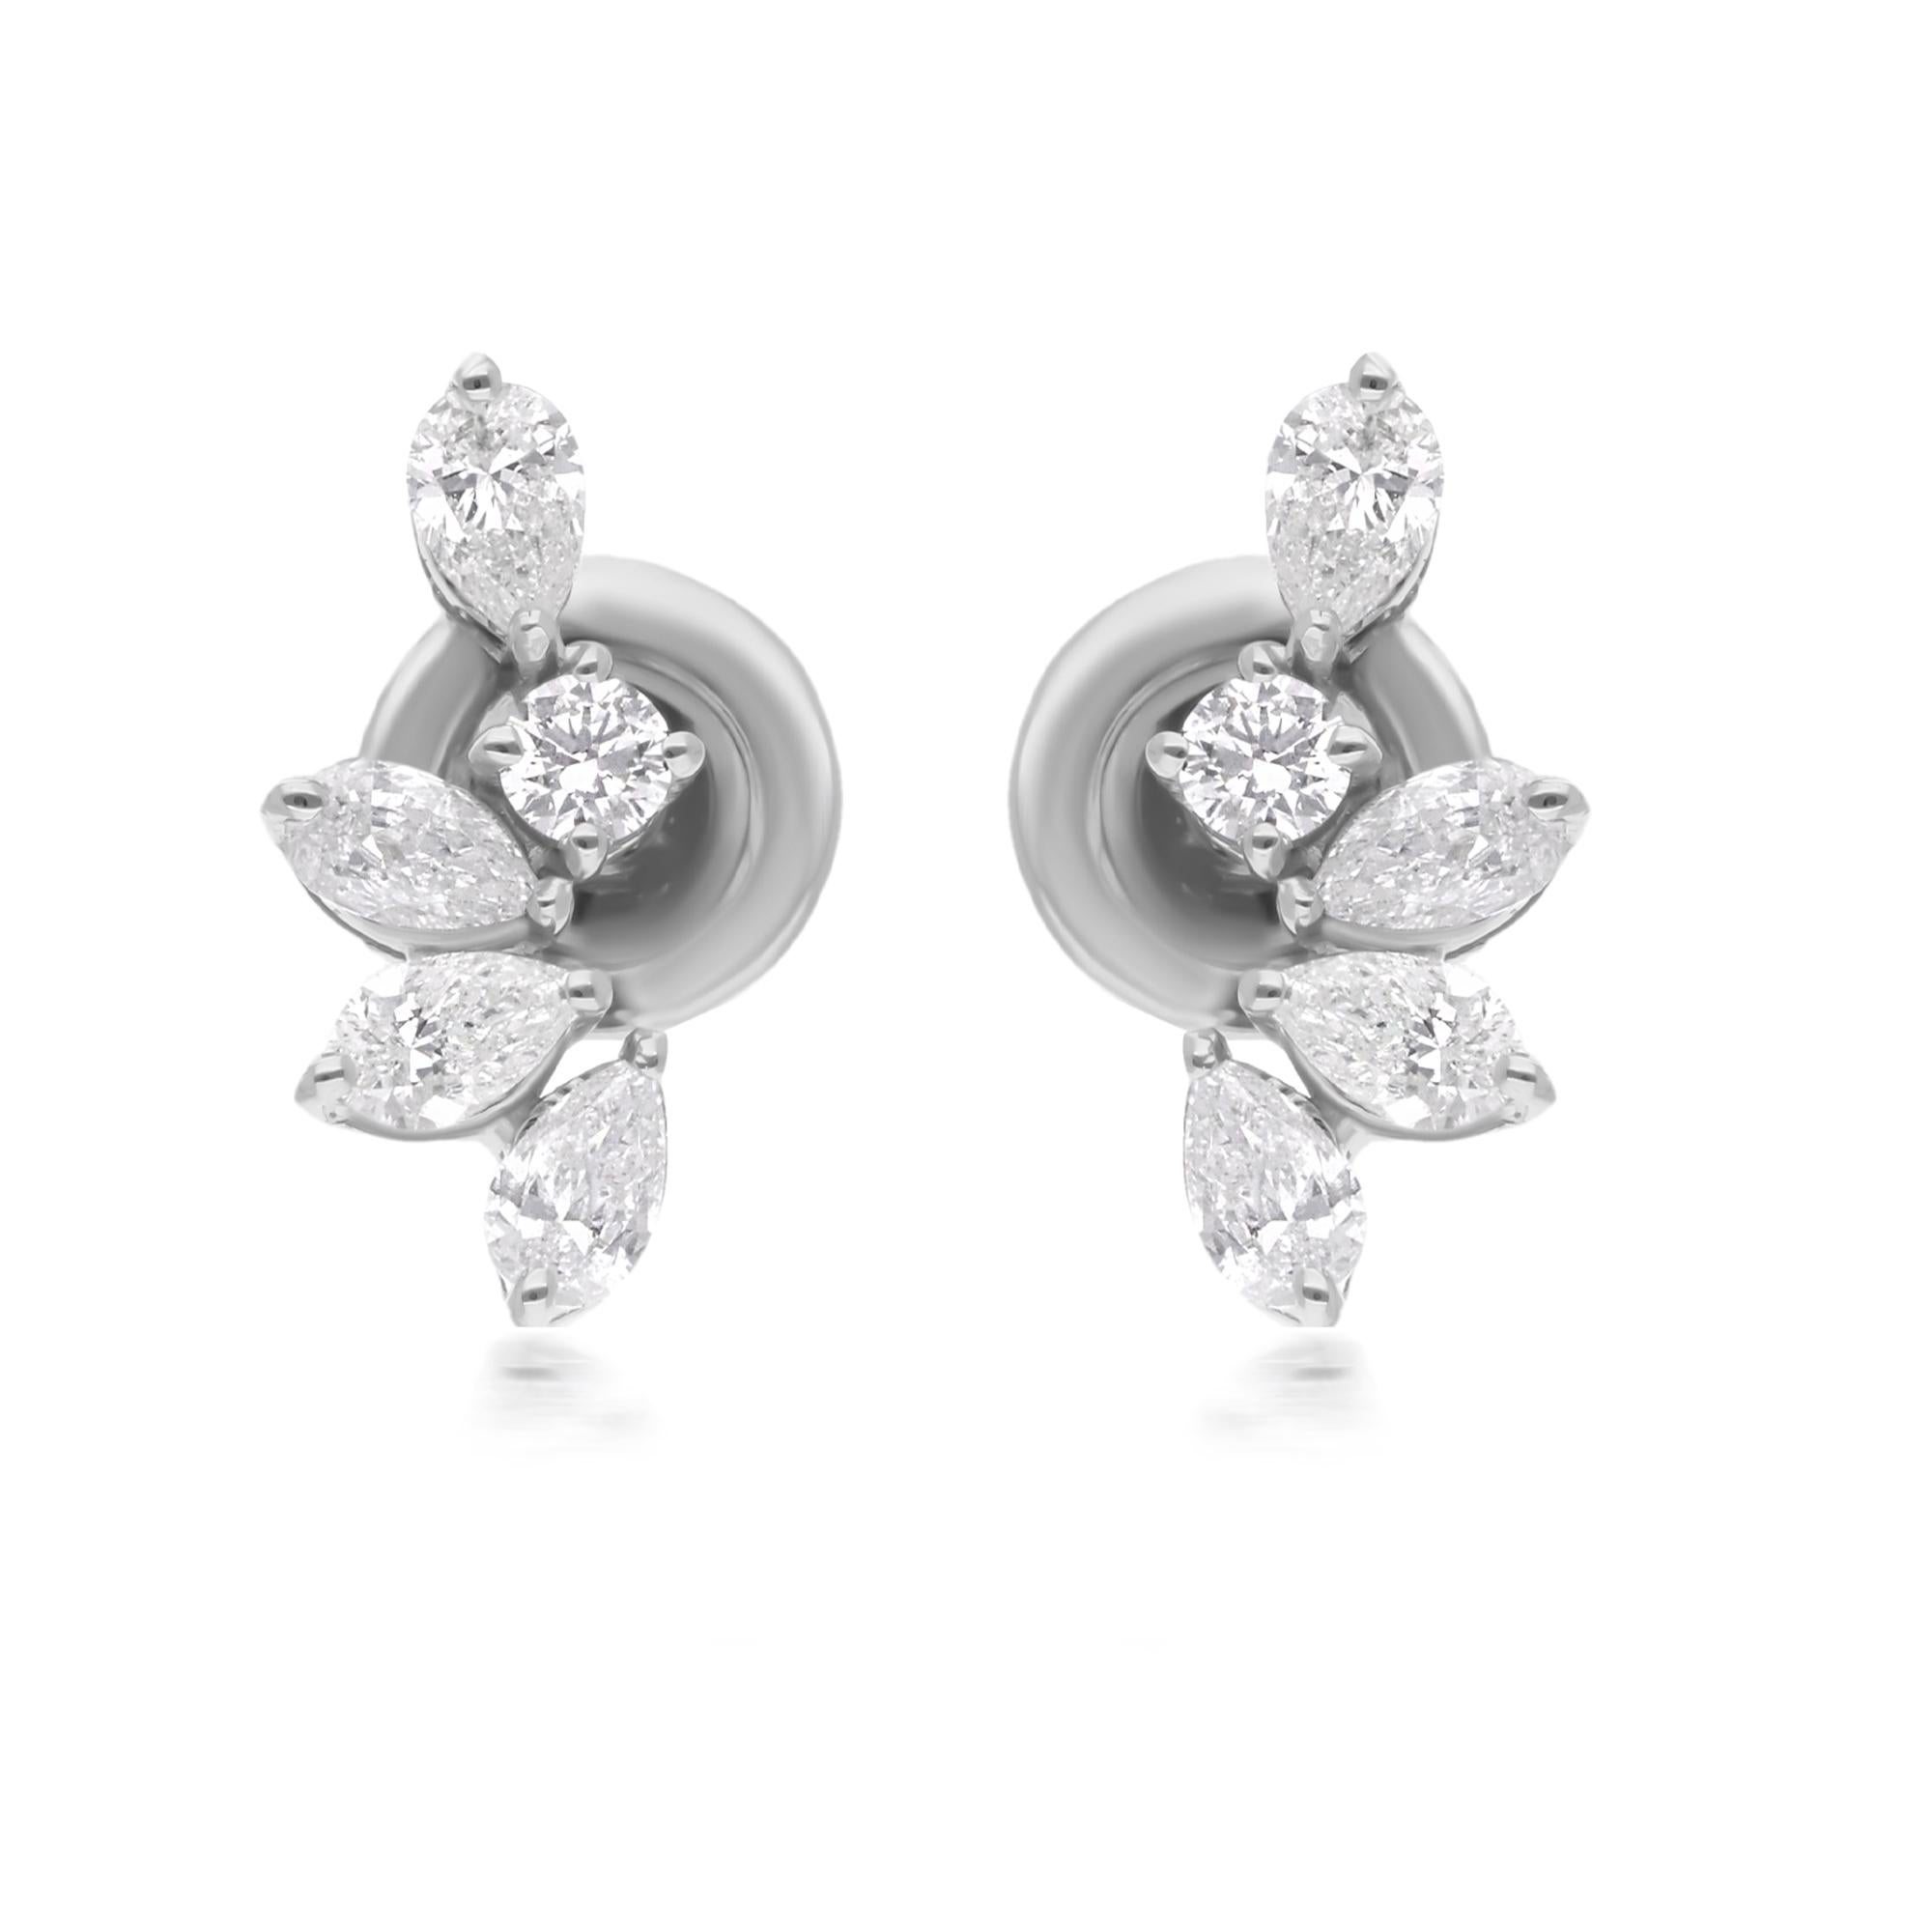 Elevate your elegance with these stunning 0.37 Carat Pear & Round Diamond Stud Earrings, meticulously crafted in luxurious 18 Karat White Gold. These exquisite pieces of fine jewelry exude sophistication and grace, offering a timeless addition to